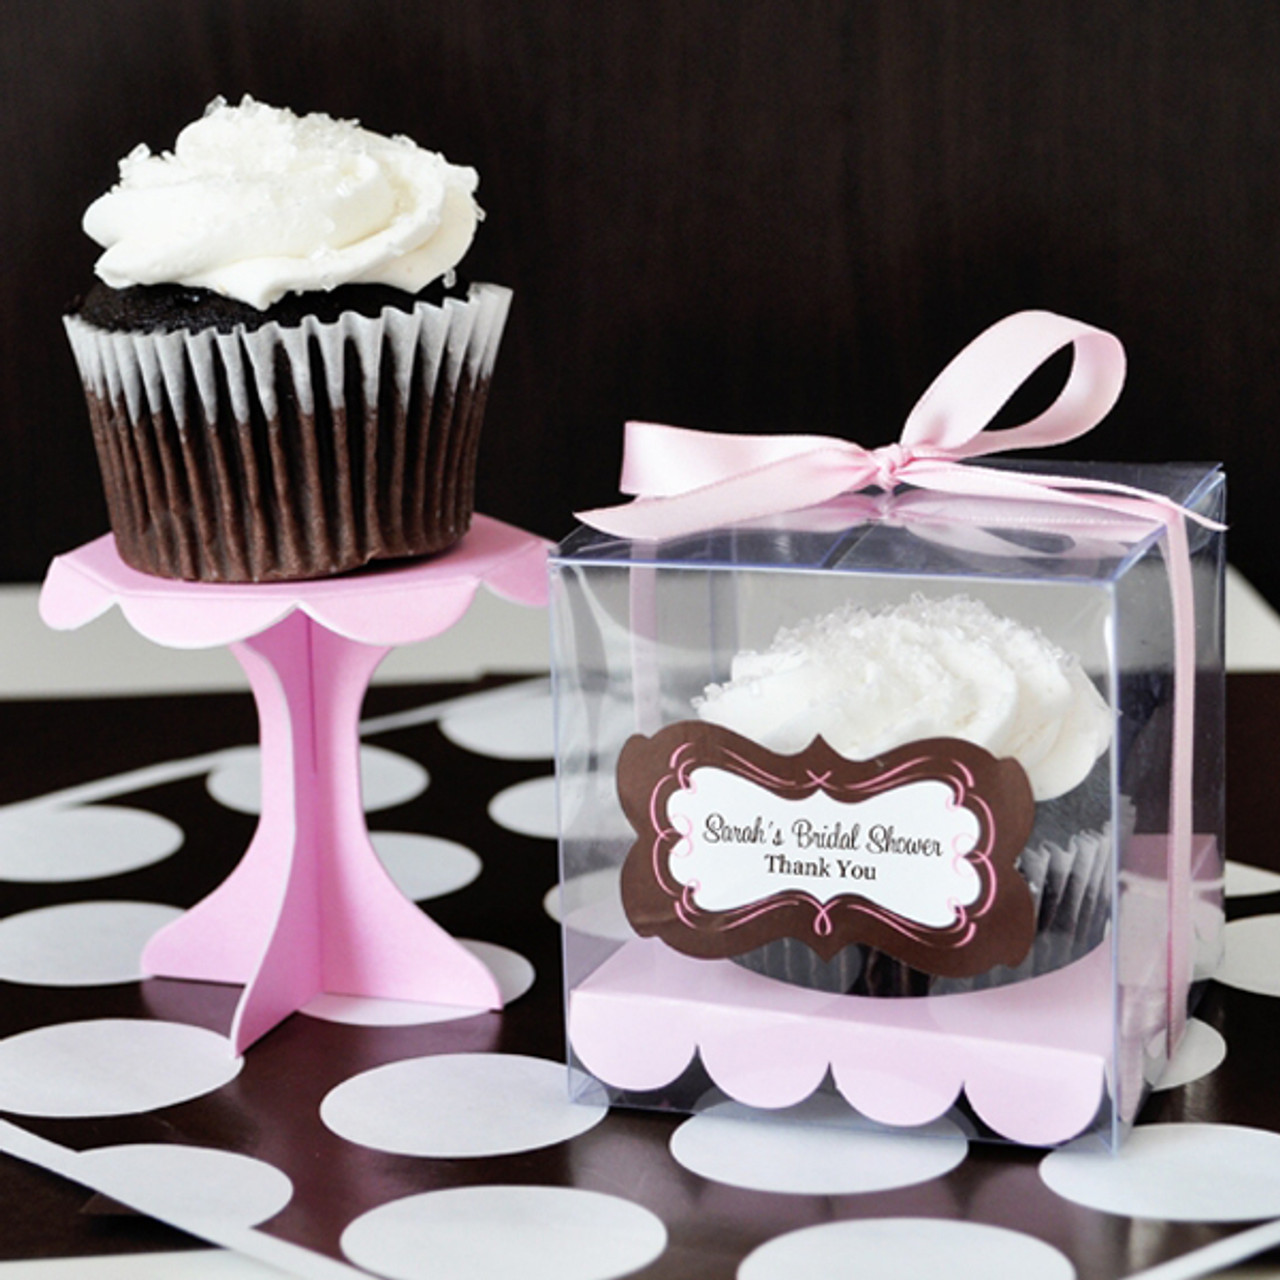 Personalized Baby Shower Cupcake Favor Containers